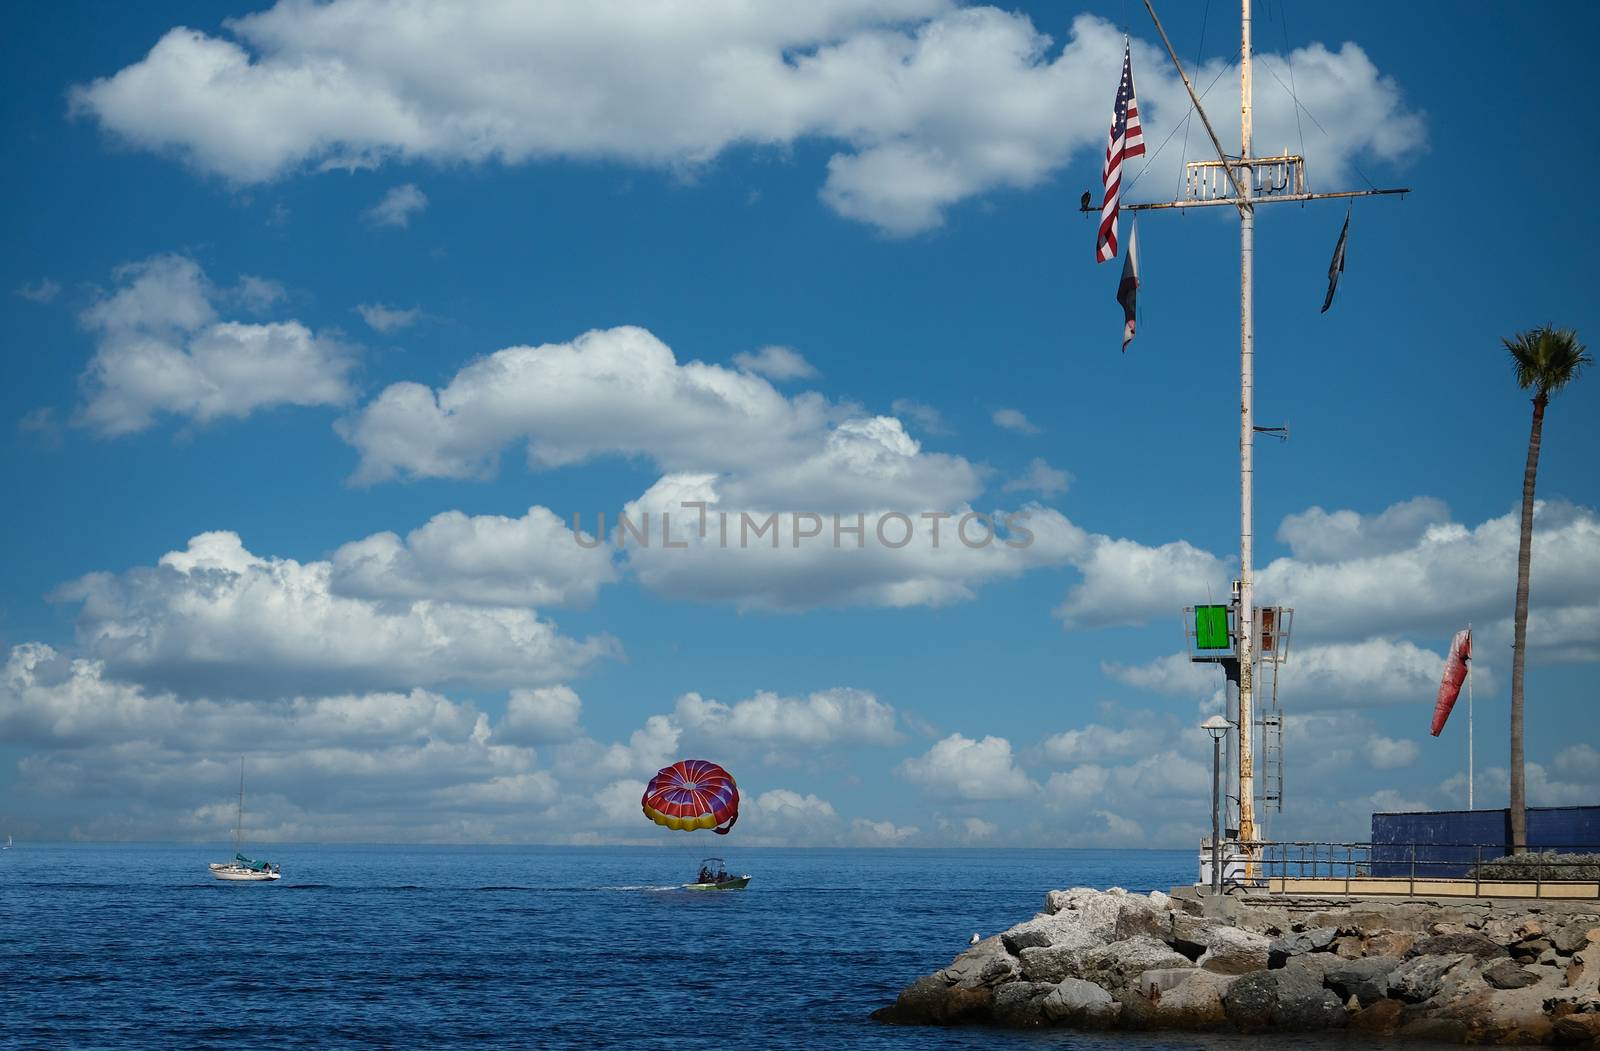 Parasailing in Avalon Harbor by dbvirago